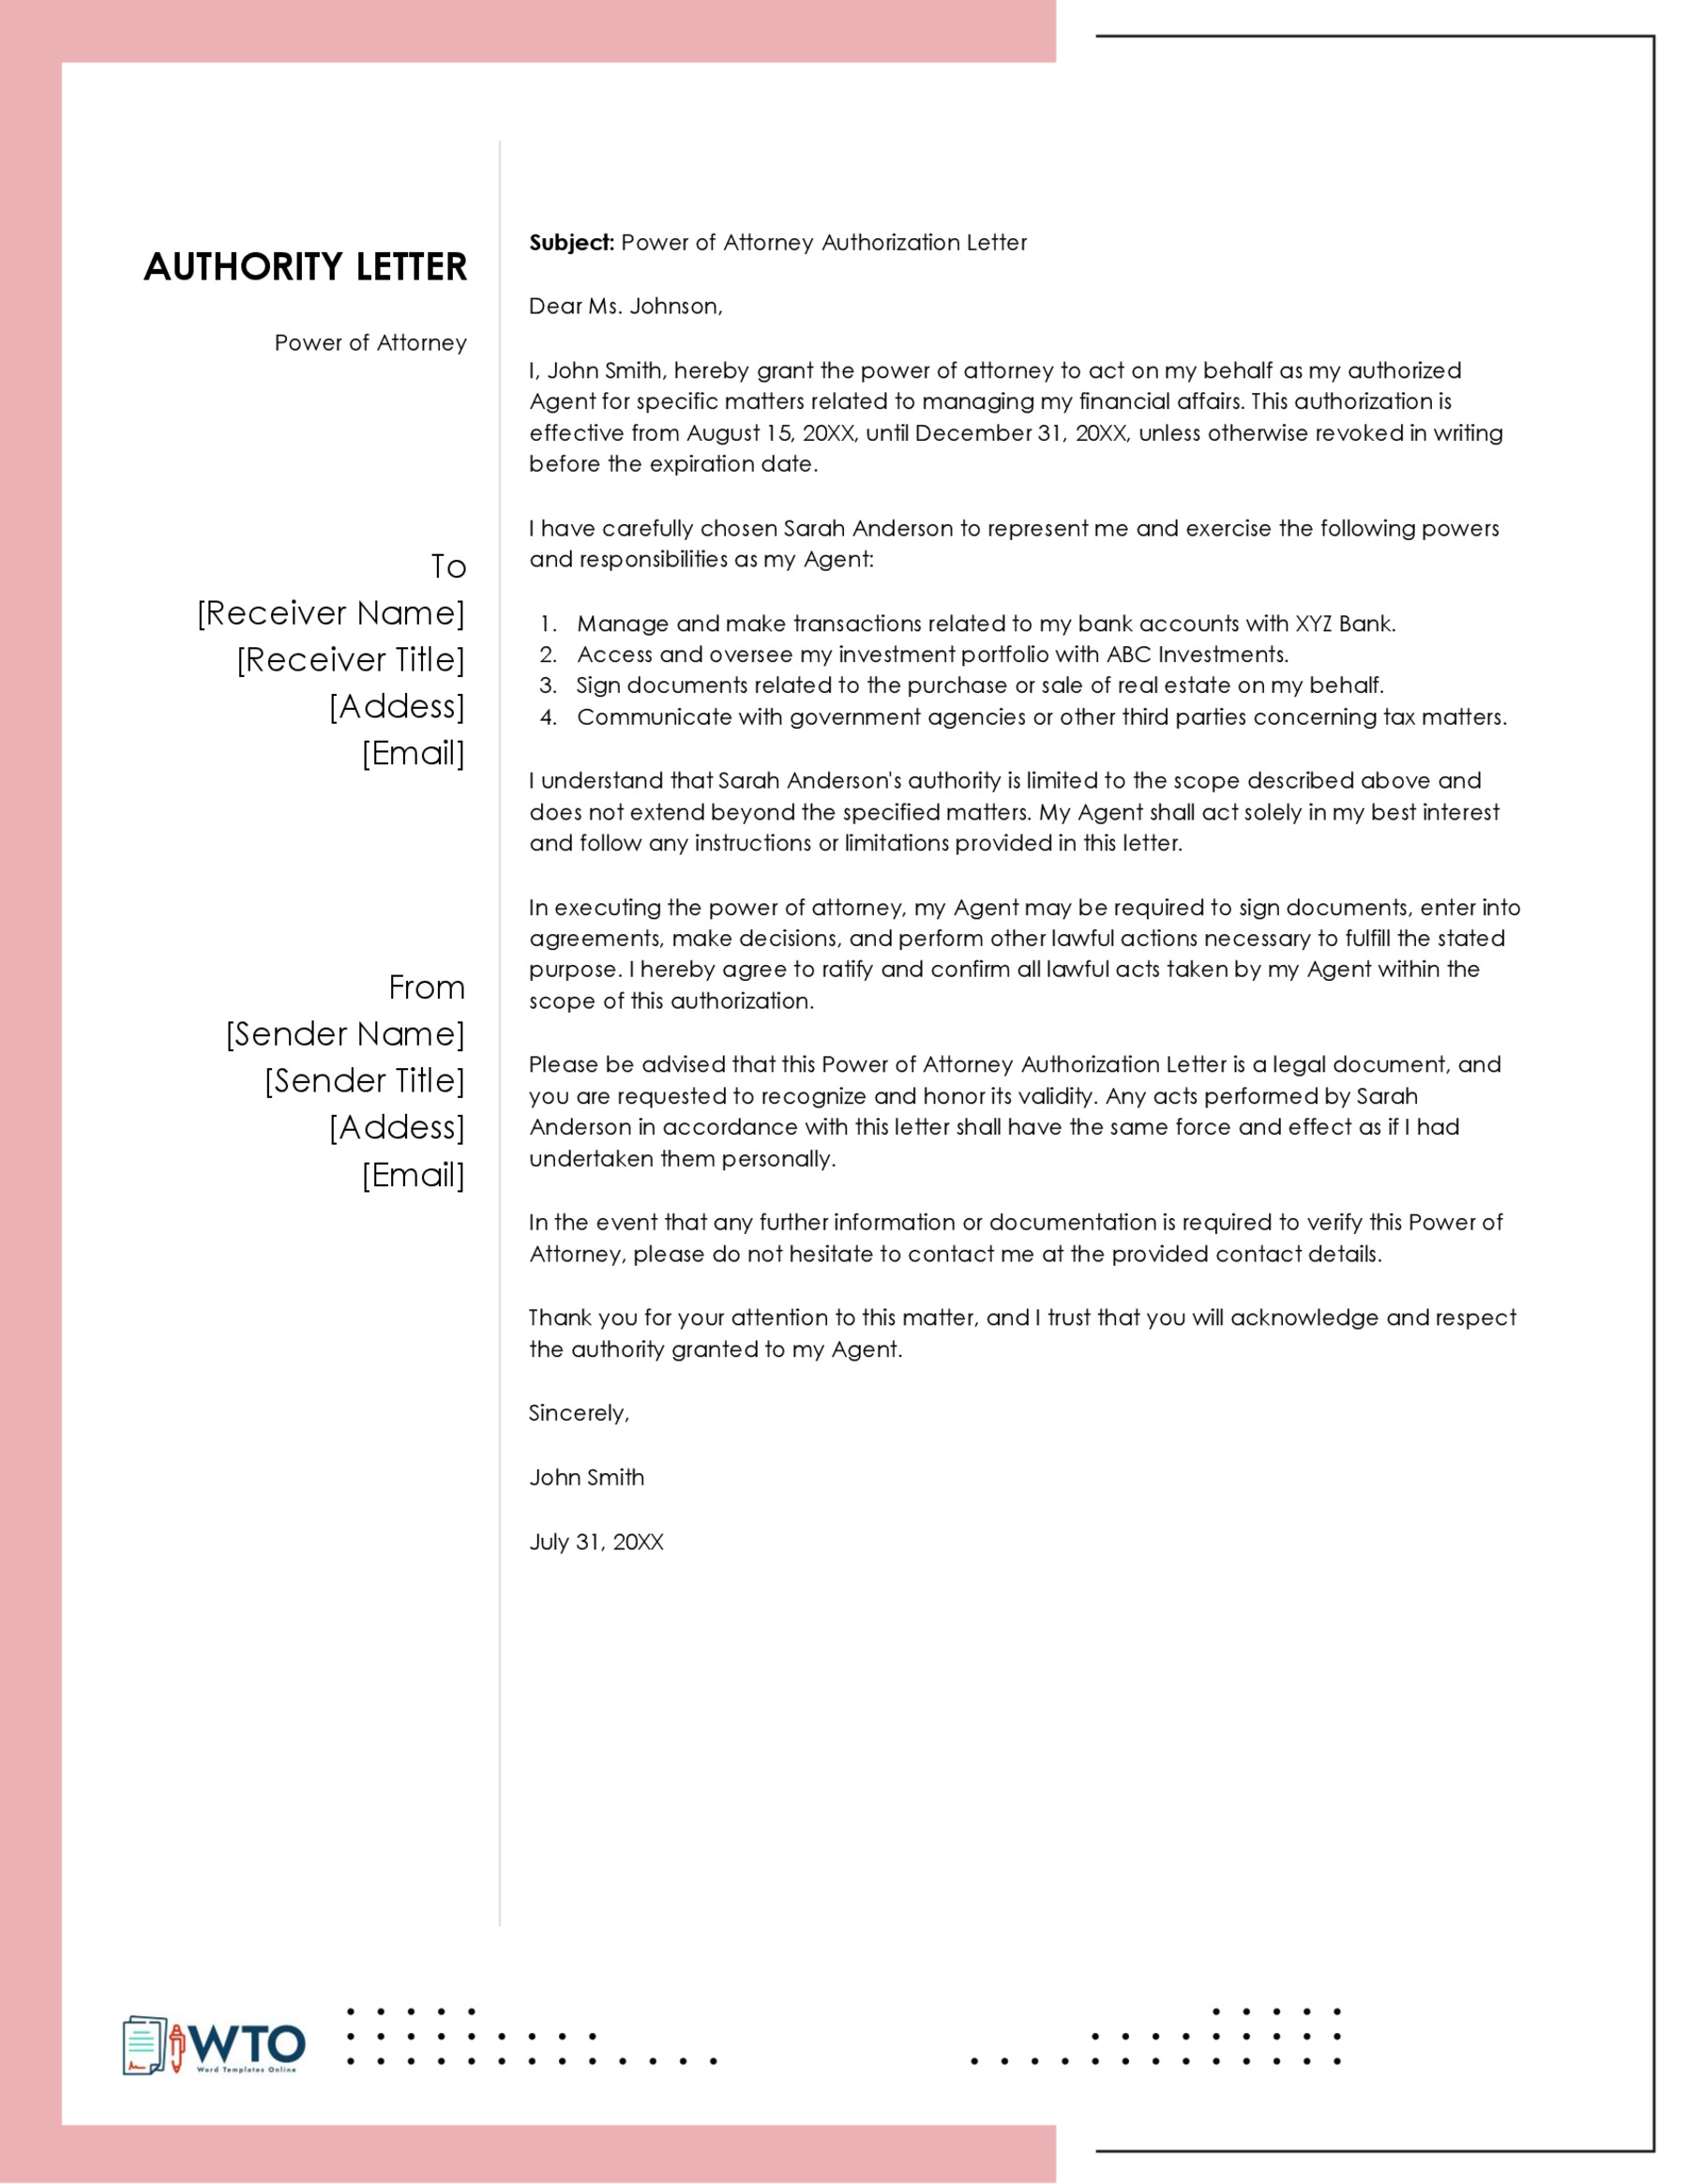 Power of Attorney Letter Sample in ms word free download